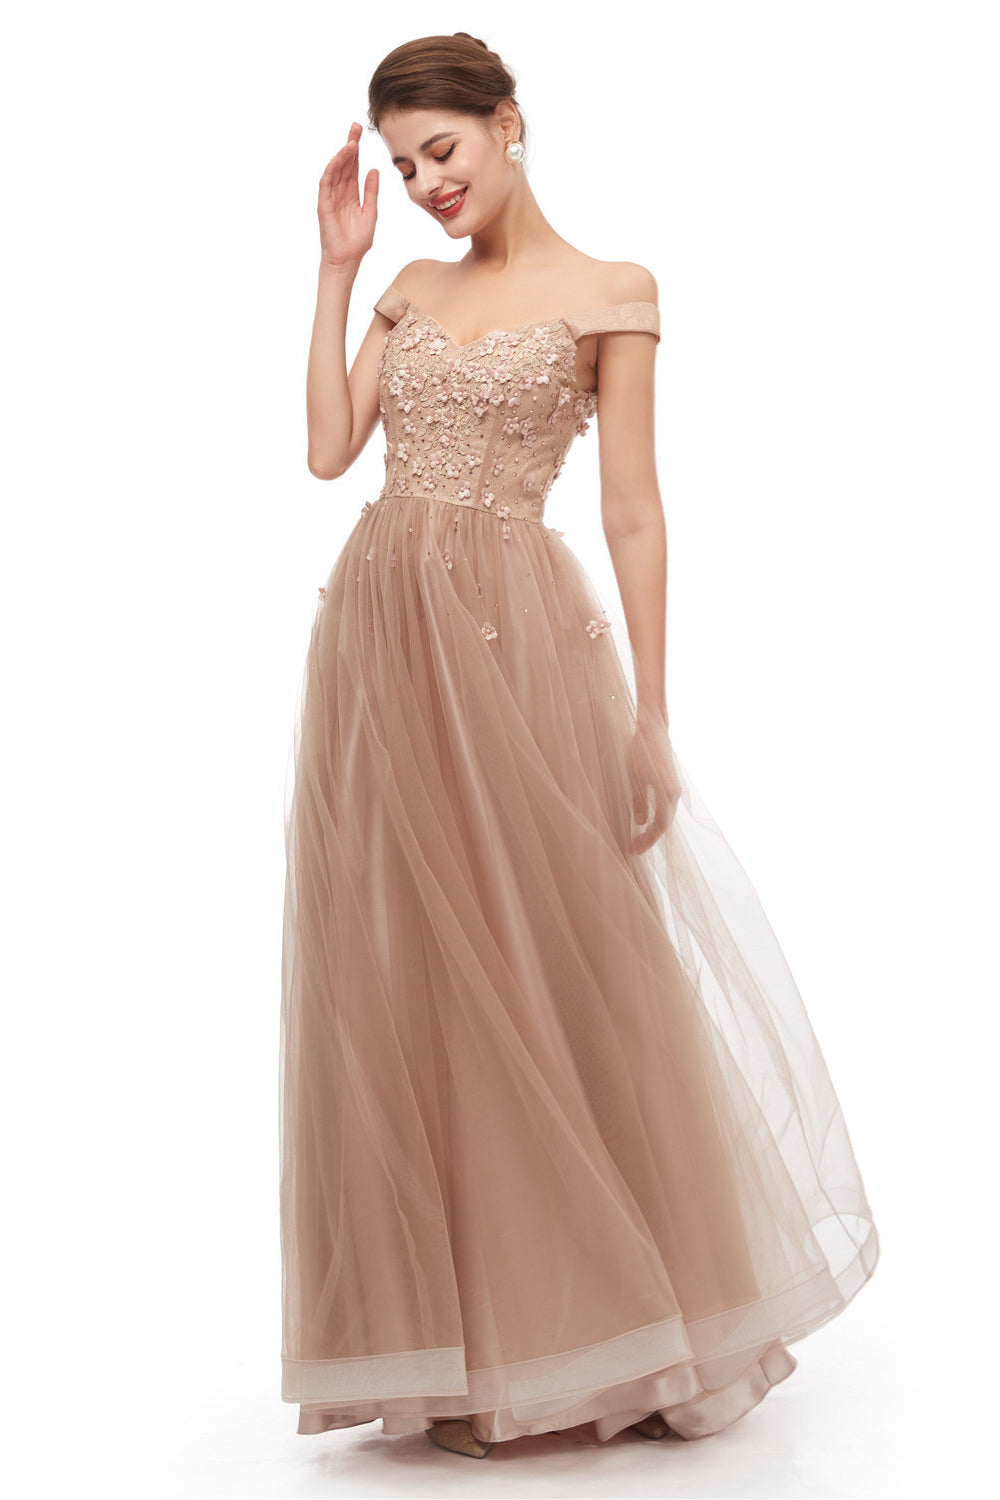 White Prom Dress, Off-Shoulder Pearls Applique A-Line Tulle Prom Dresses